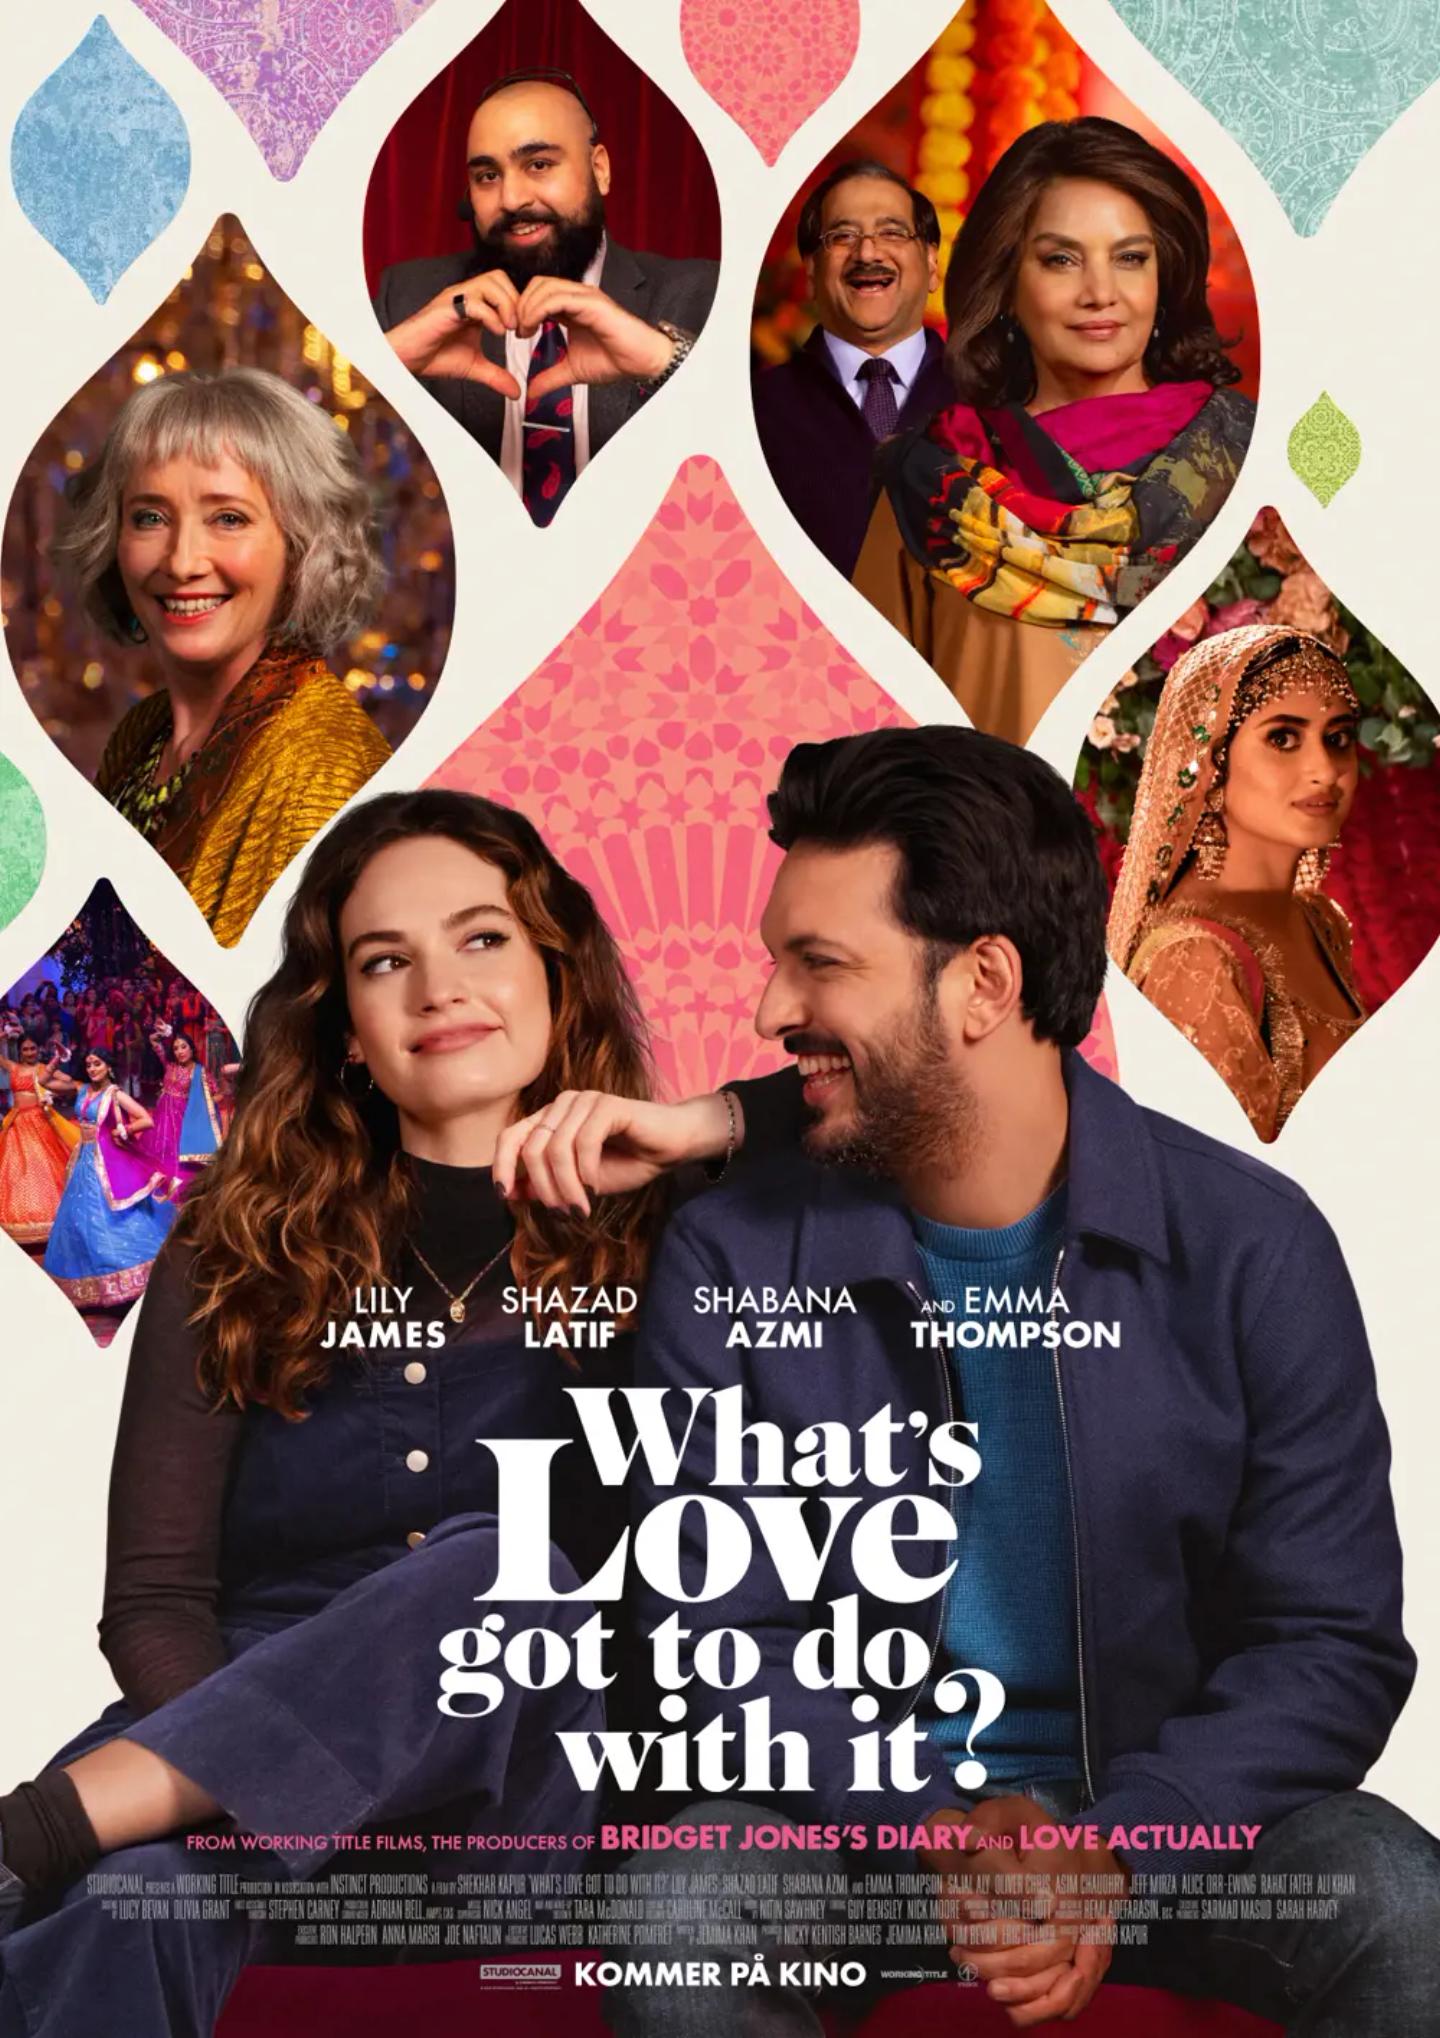 Plakat for 'What's Love got to do with it?'